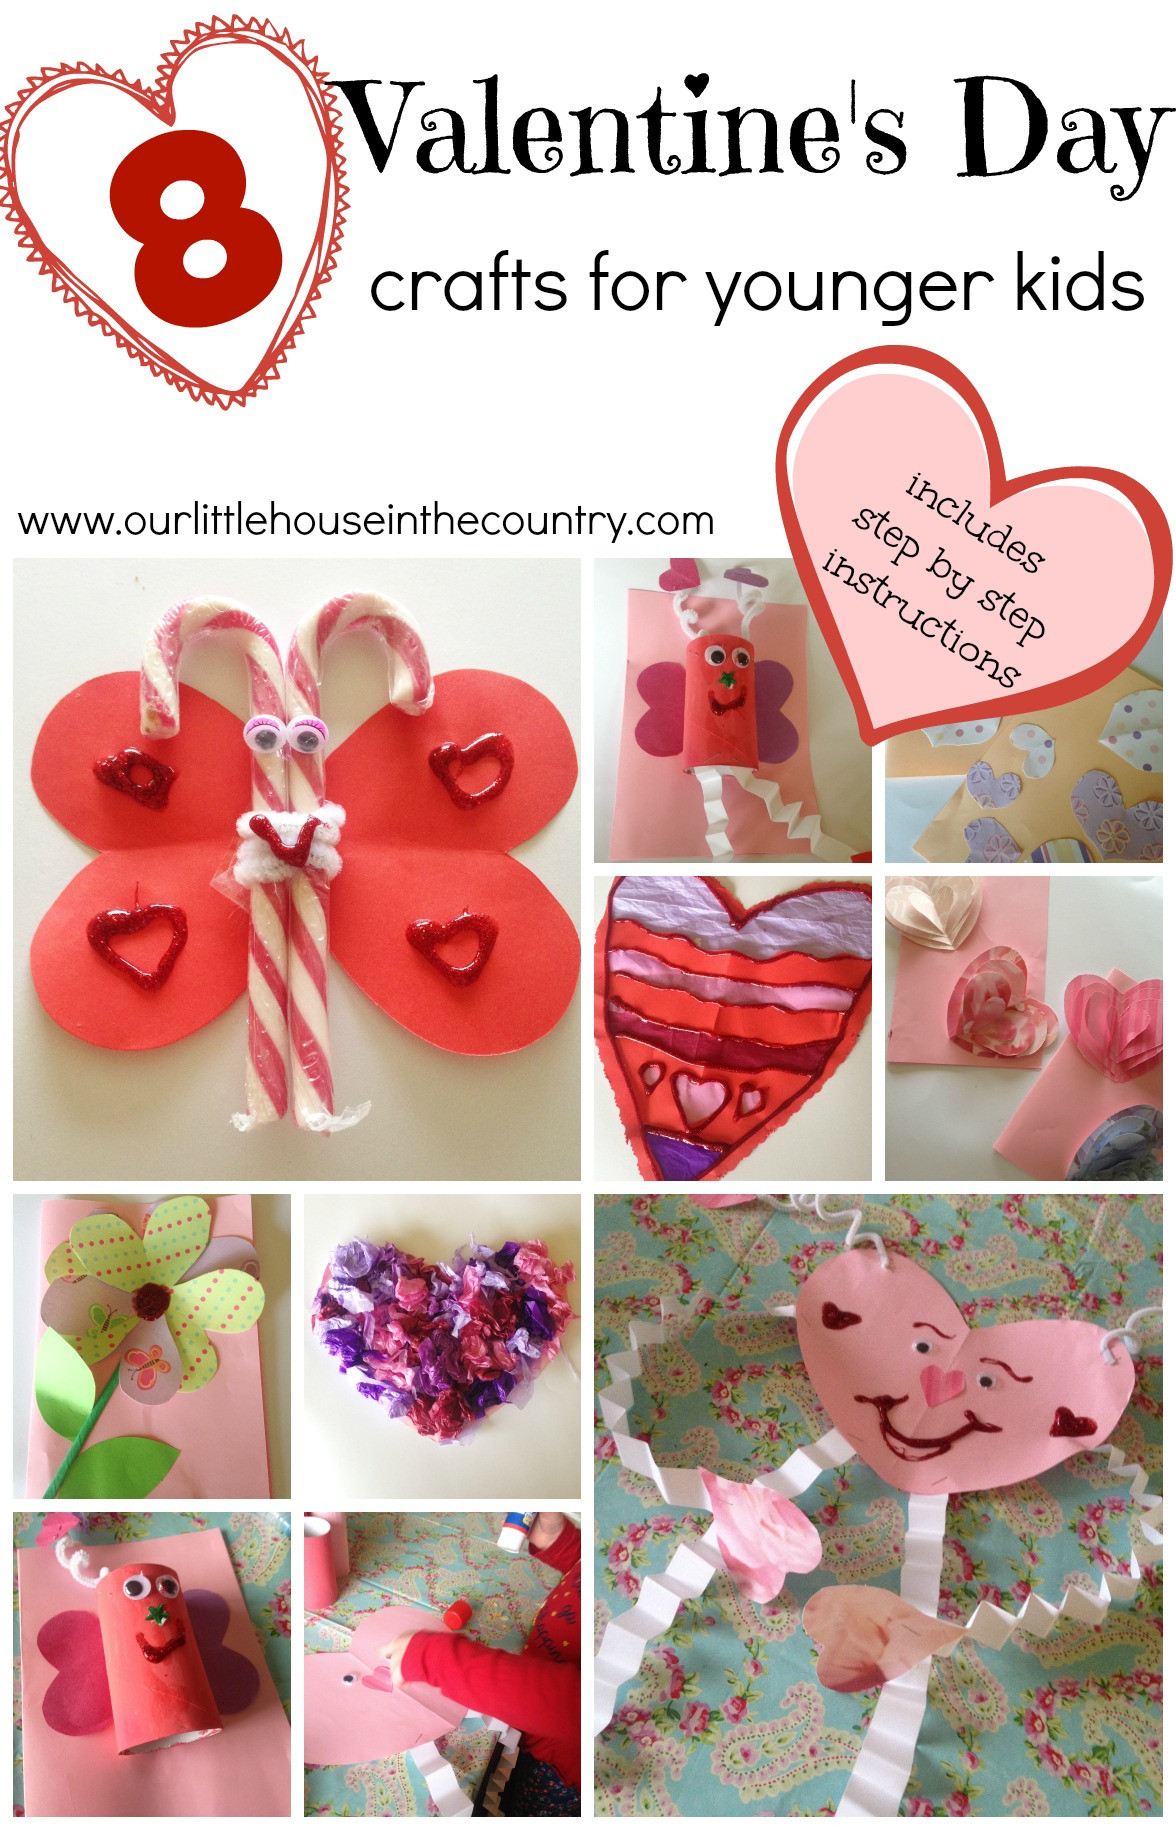 Valentines Day Craft Ideas For Preschoolers
 Valentine’s Day Crafts for Younger Children Preschool and